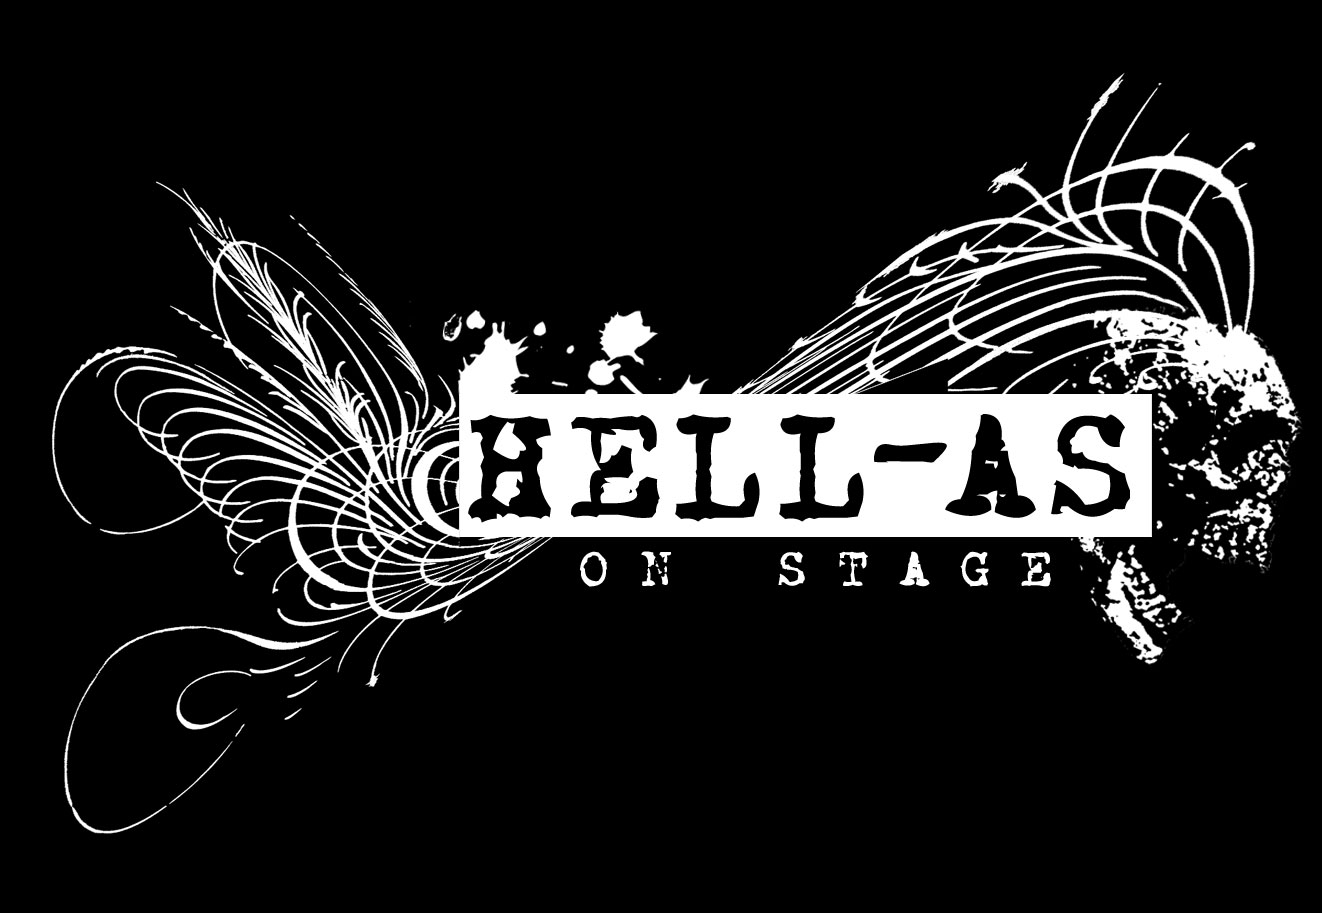 Hell-as On Stage